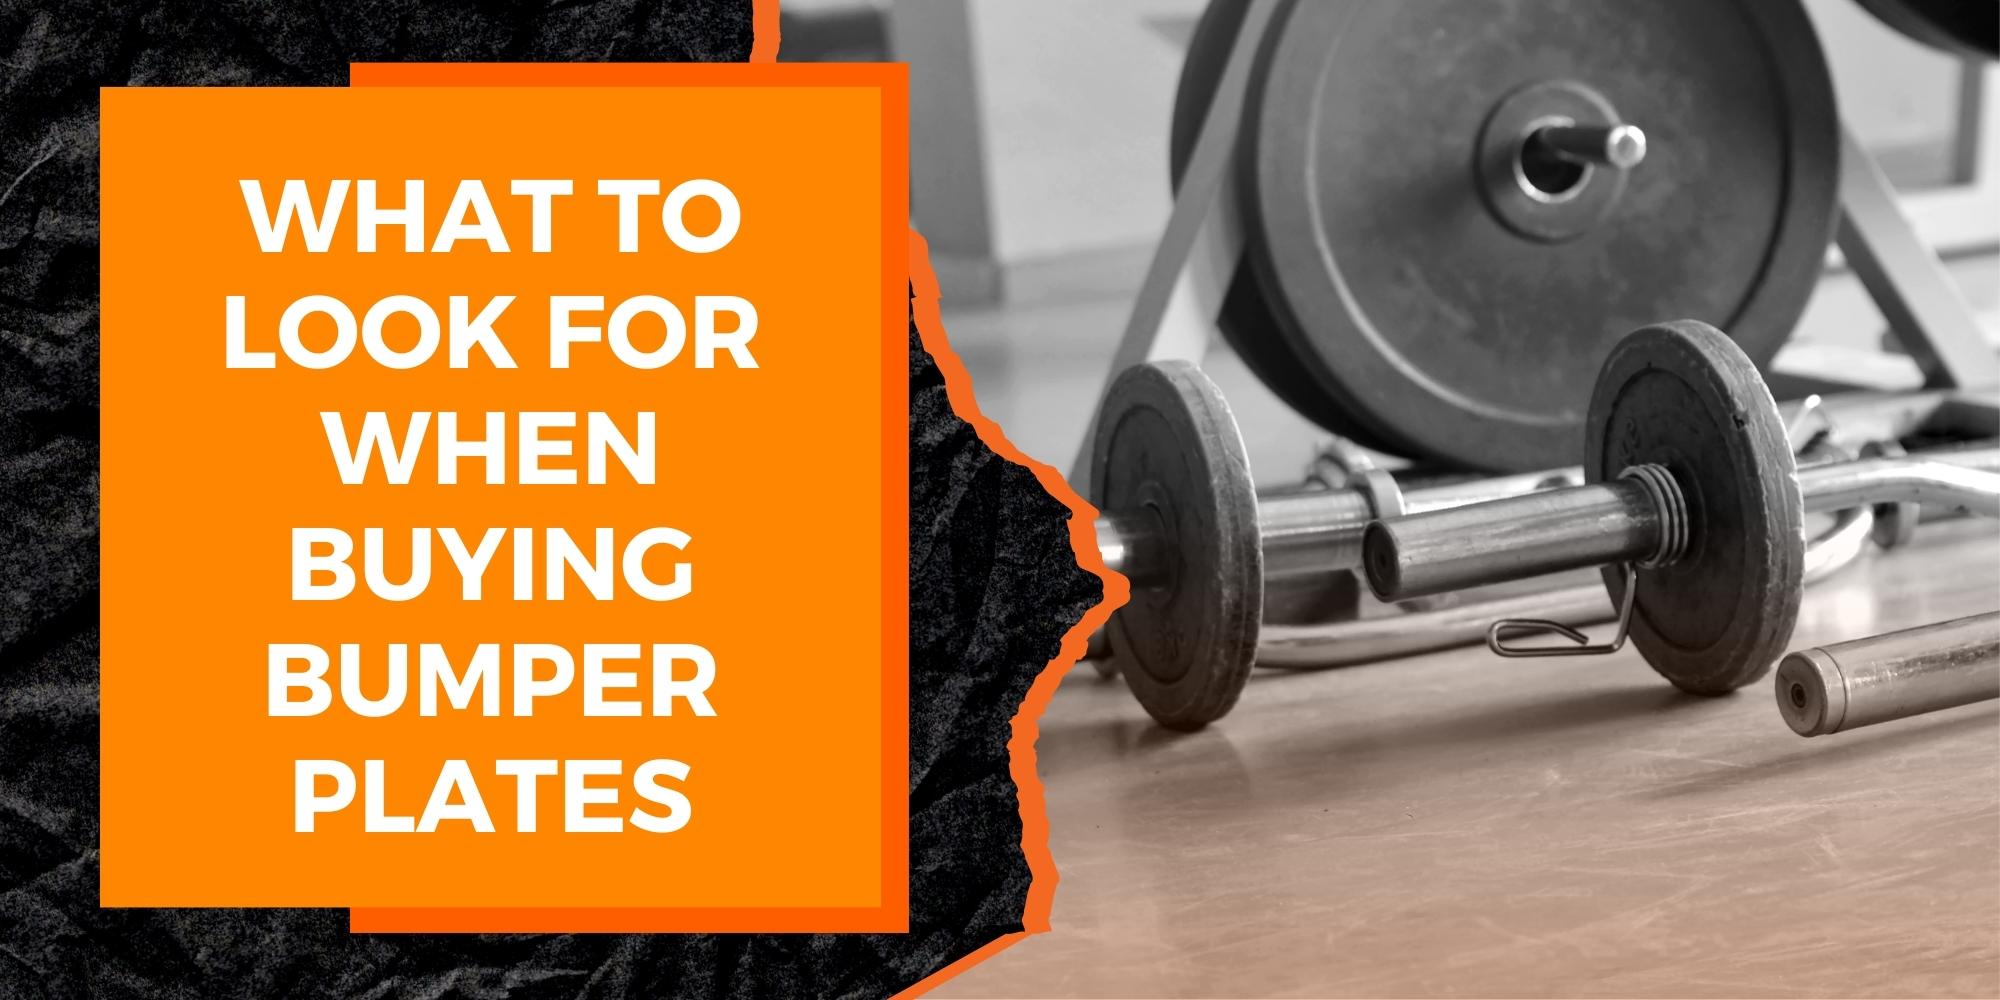 What to Look for When Buying Bumper Plates